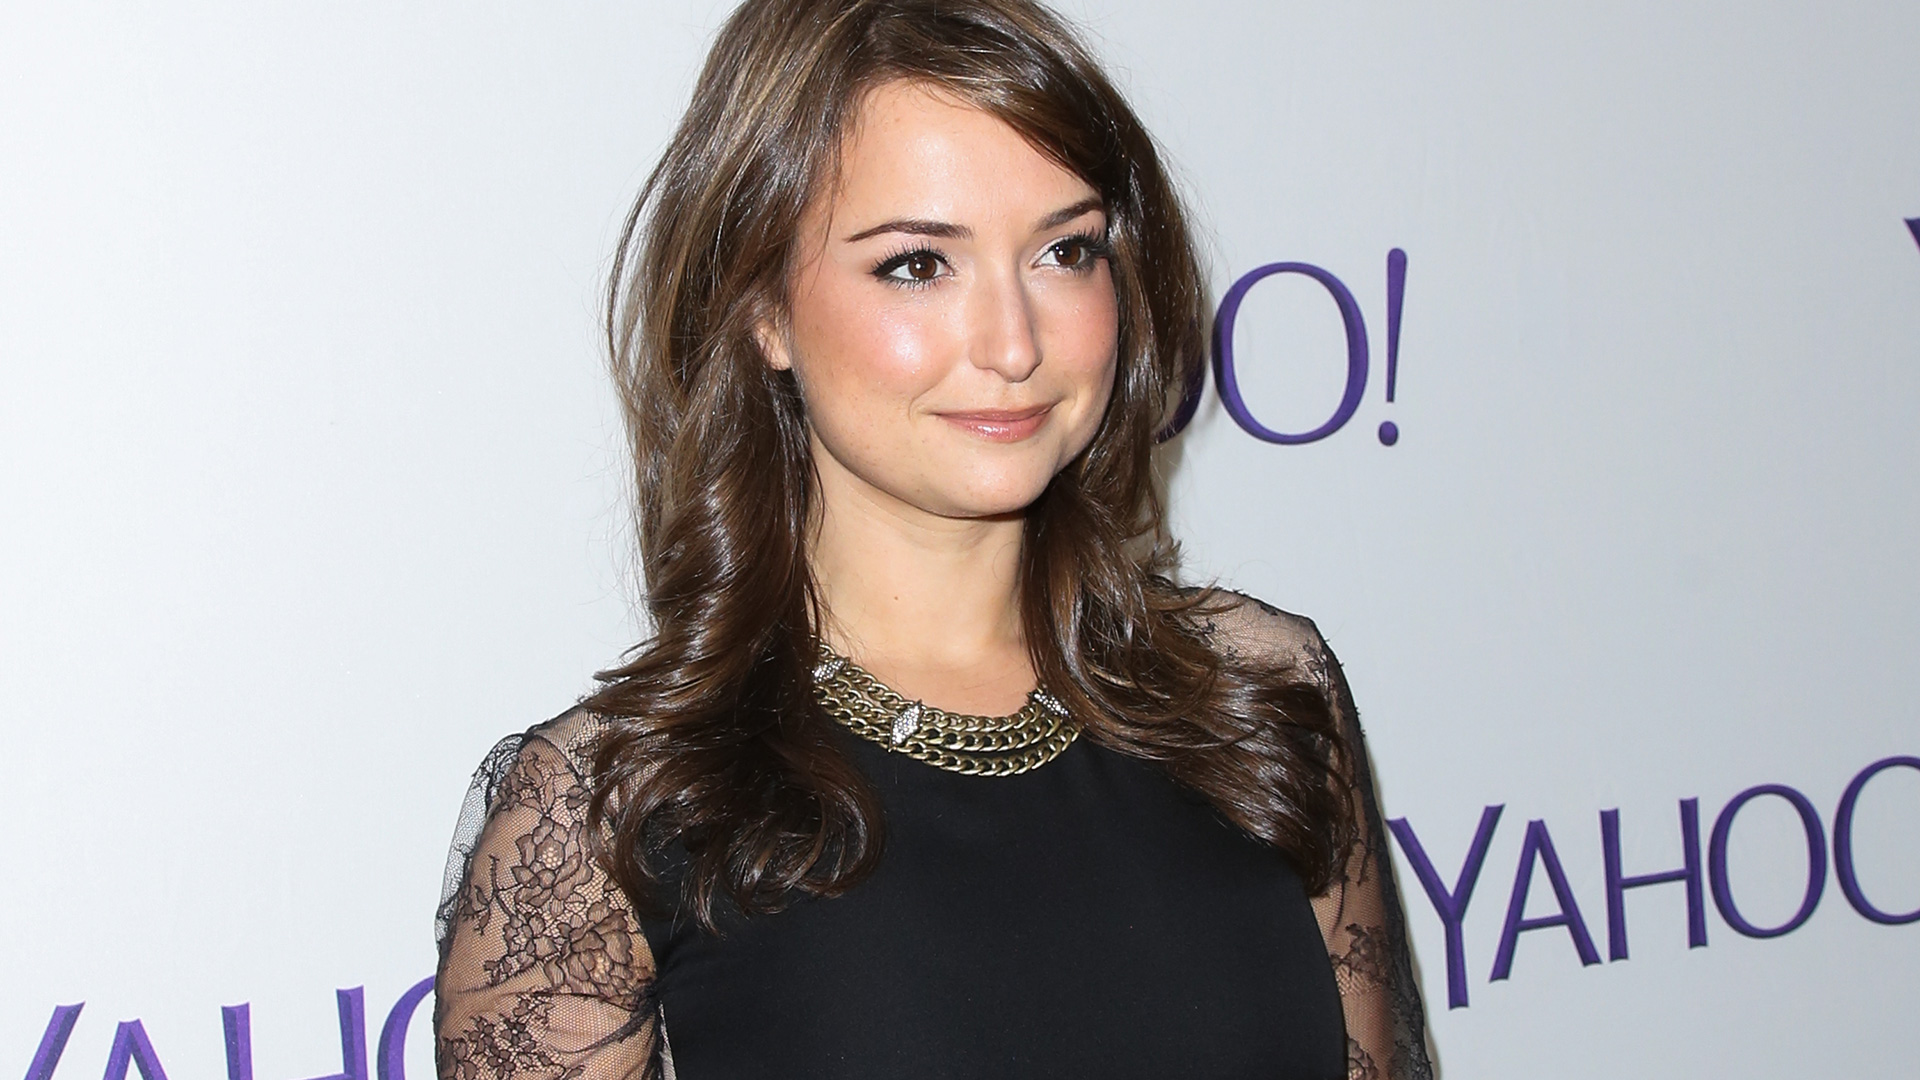 Q&A: Milana Vayntrub, aka AT&T's Lily, Tells Us About Directing Her First Commercials